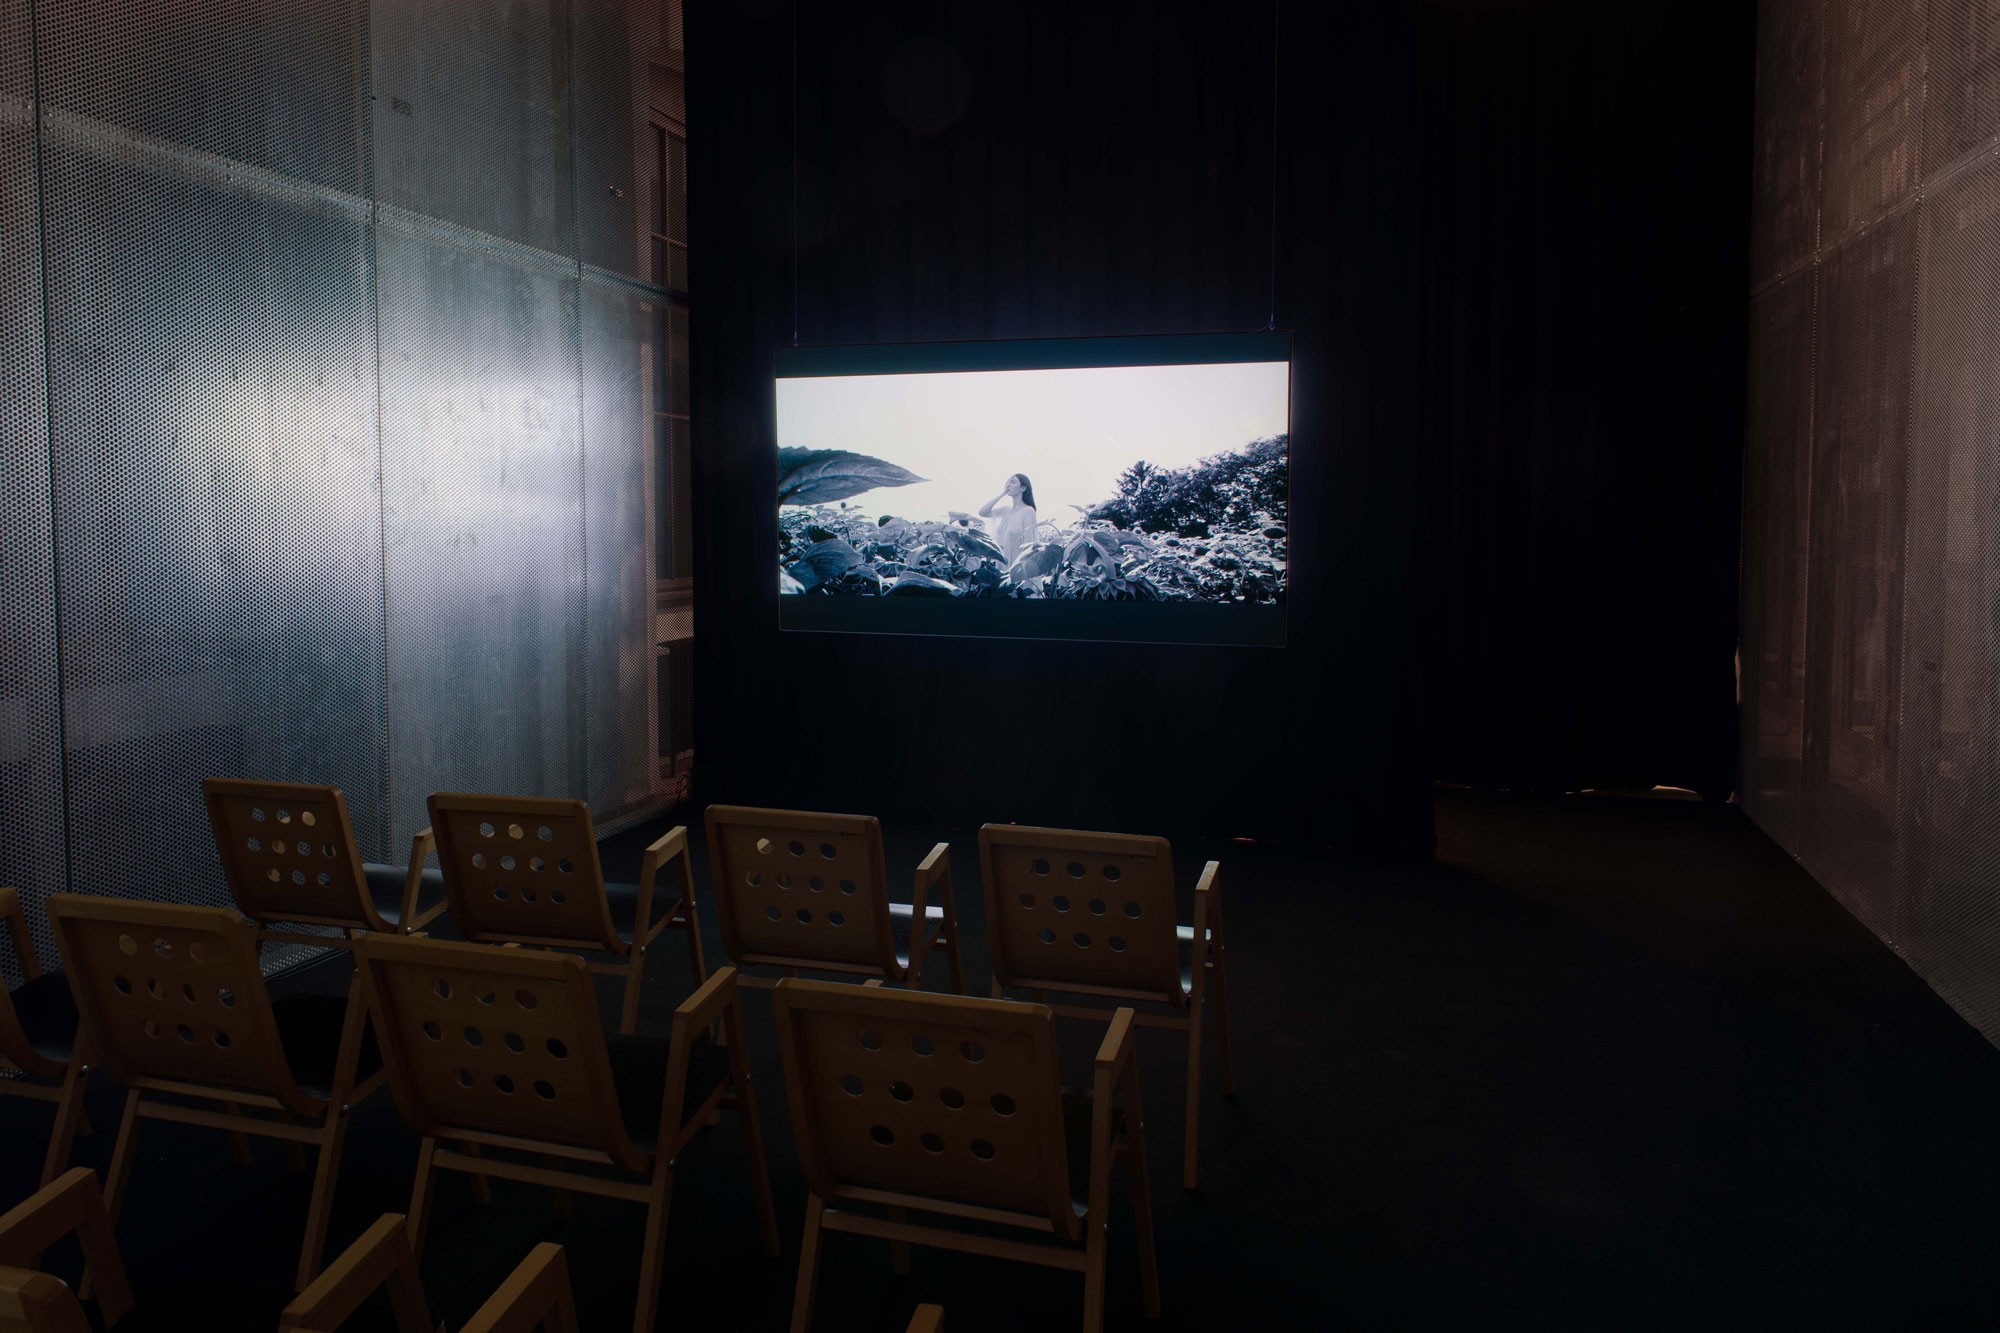 A film projection in a dark room